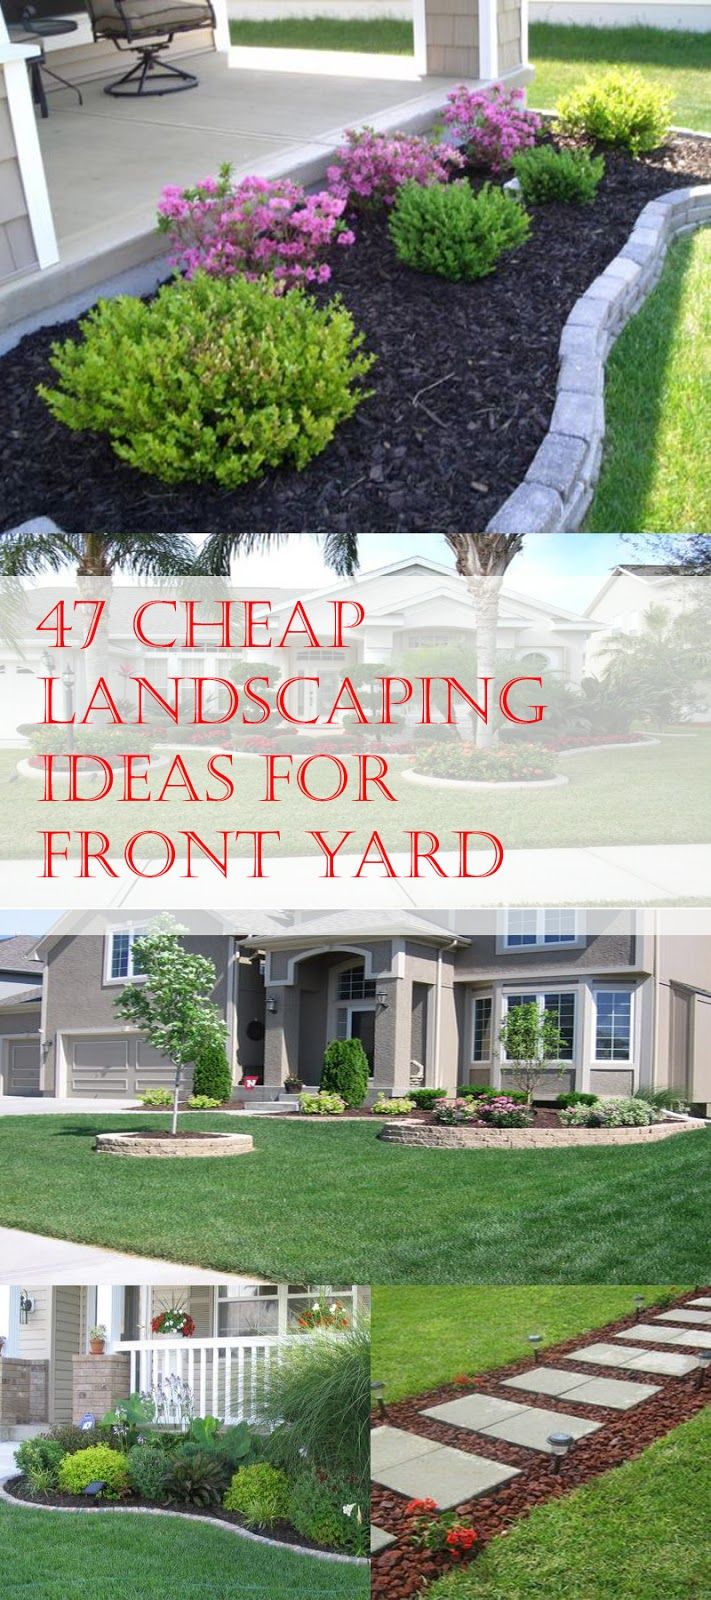 Low Cost Front Yard Landscaping